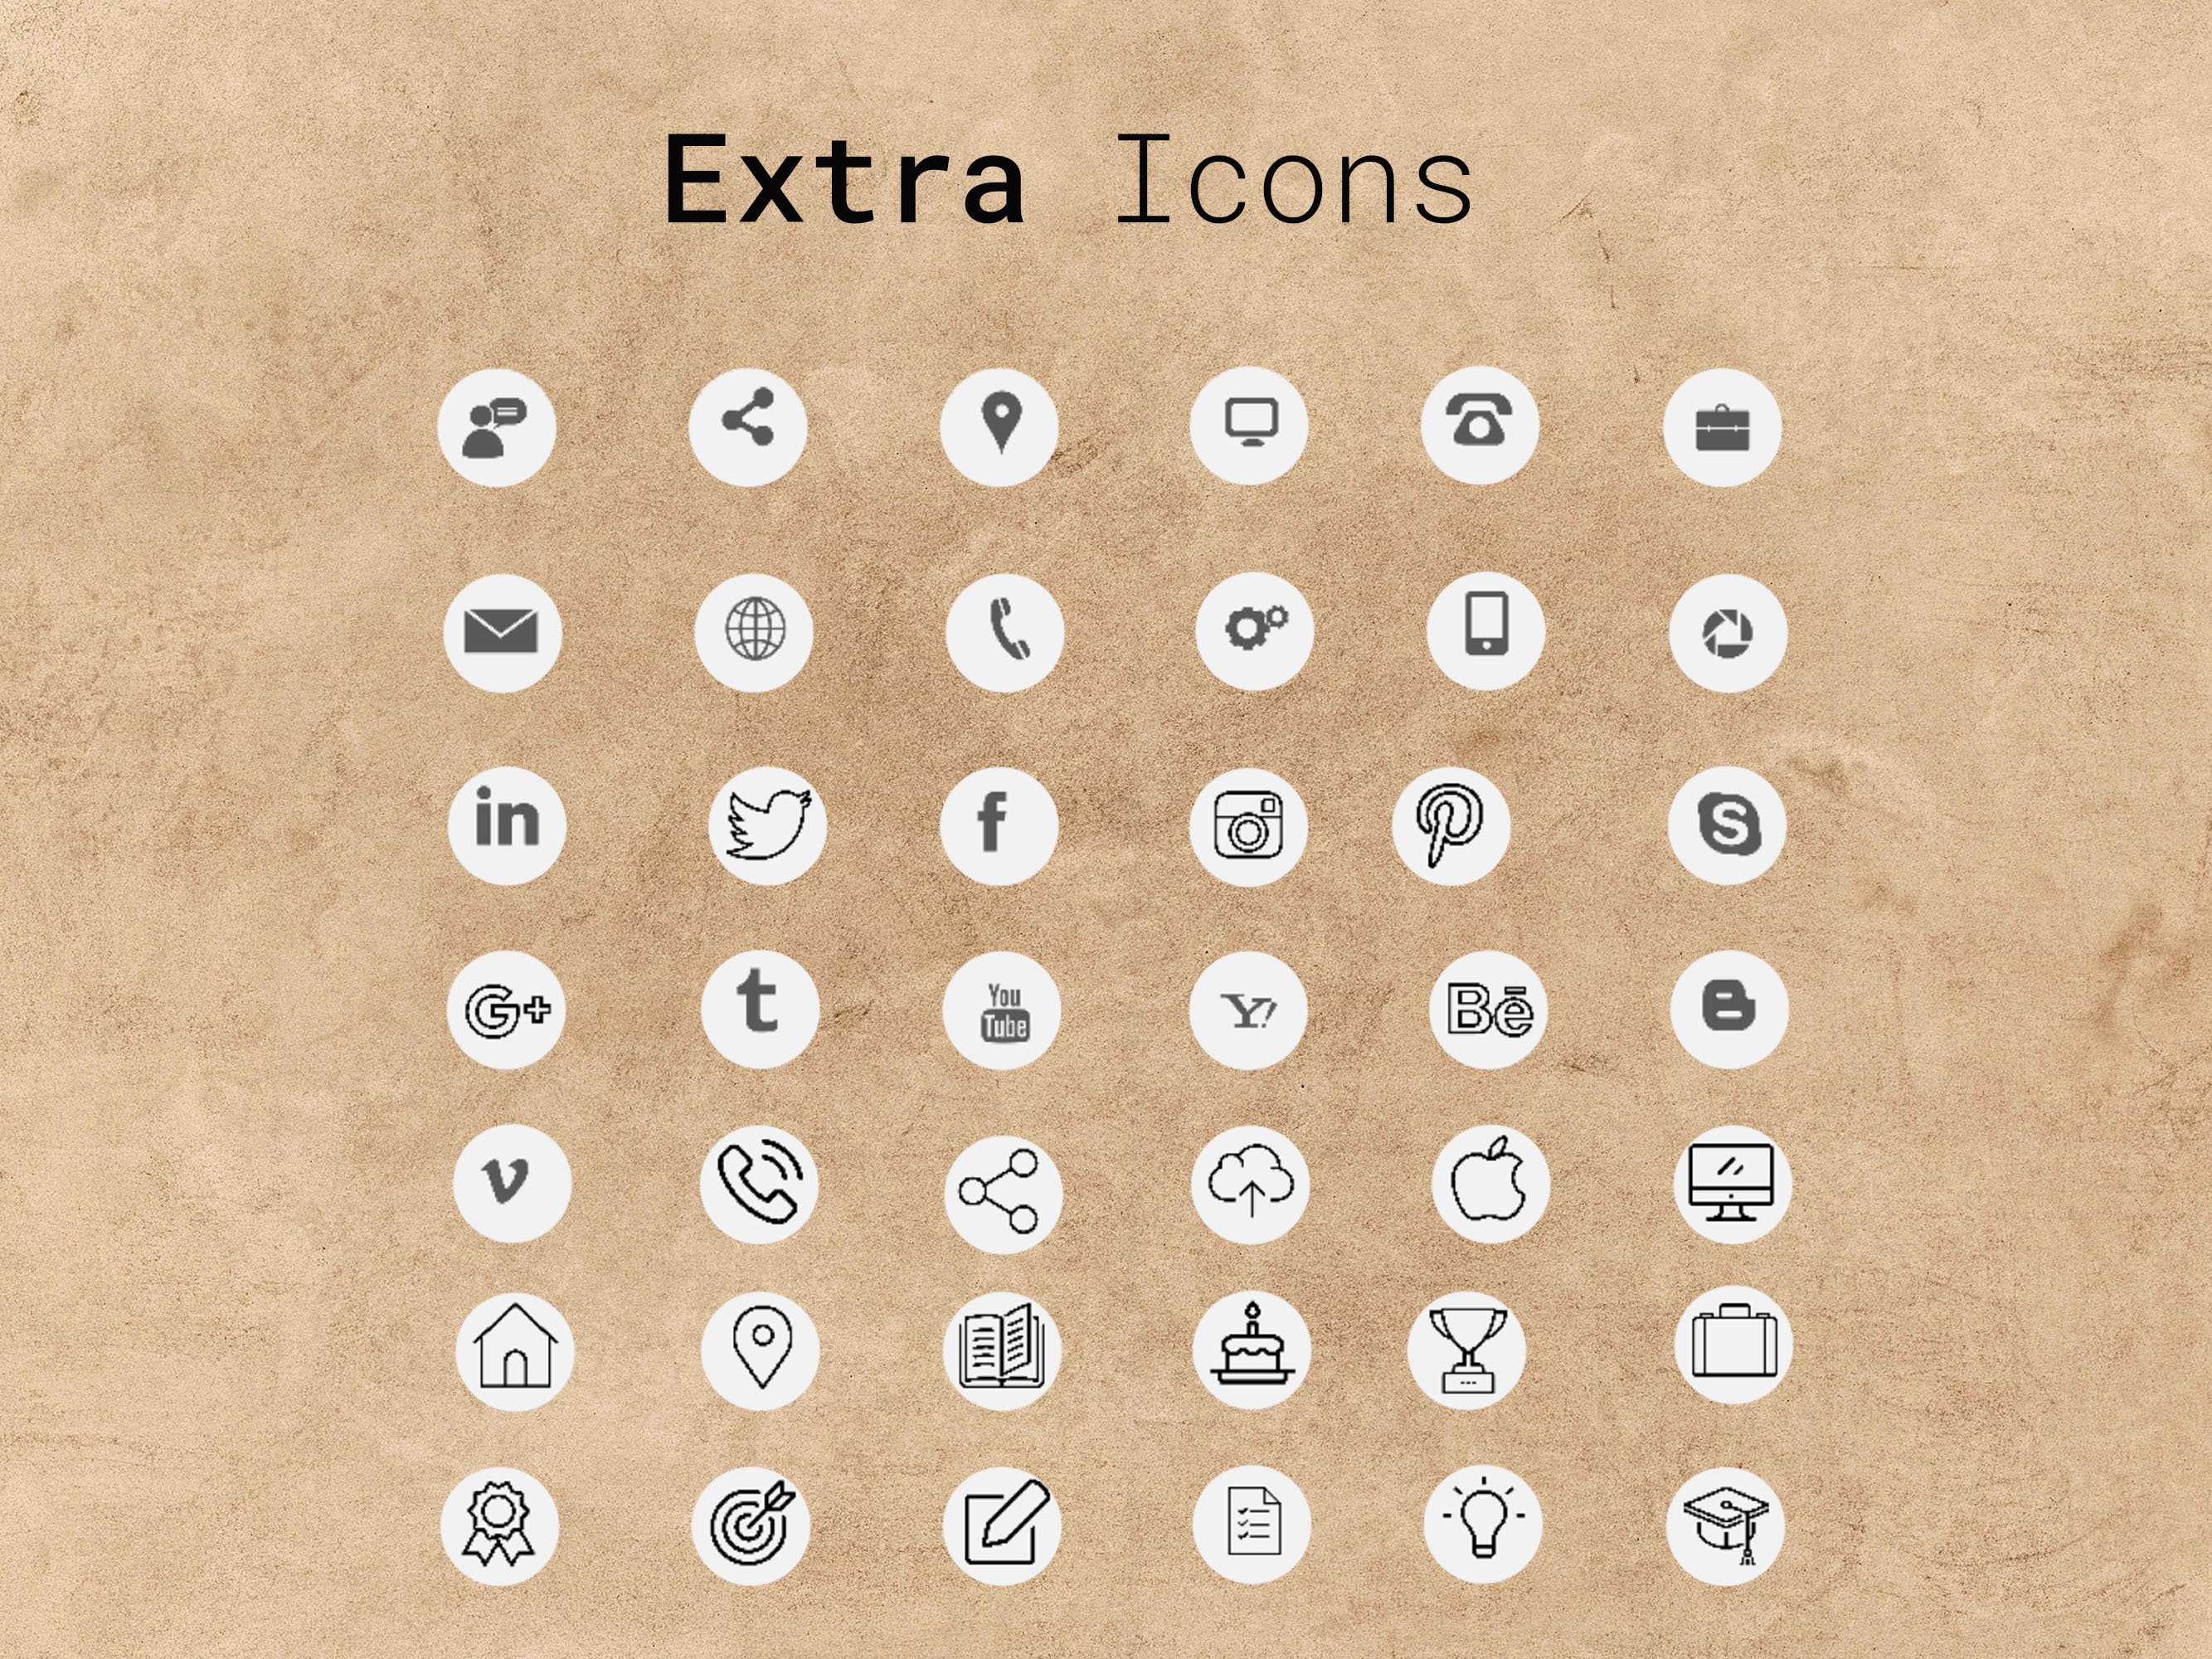 Bunch of different icons on a piece of paper.